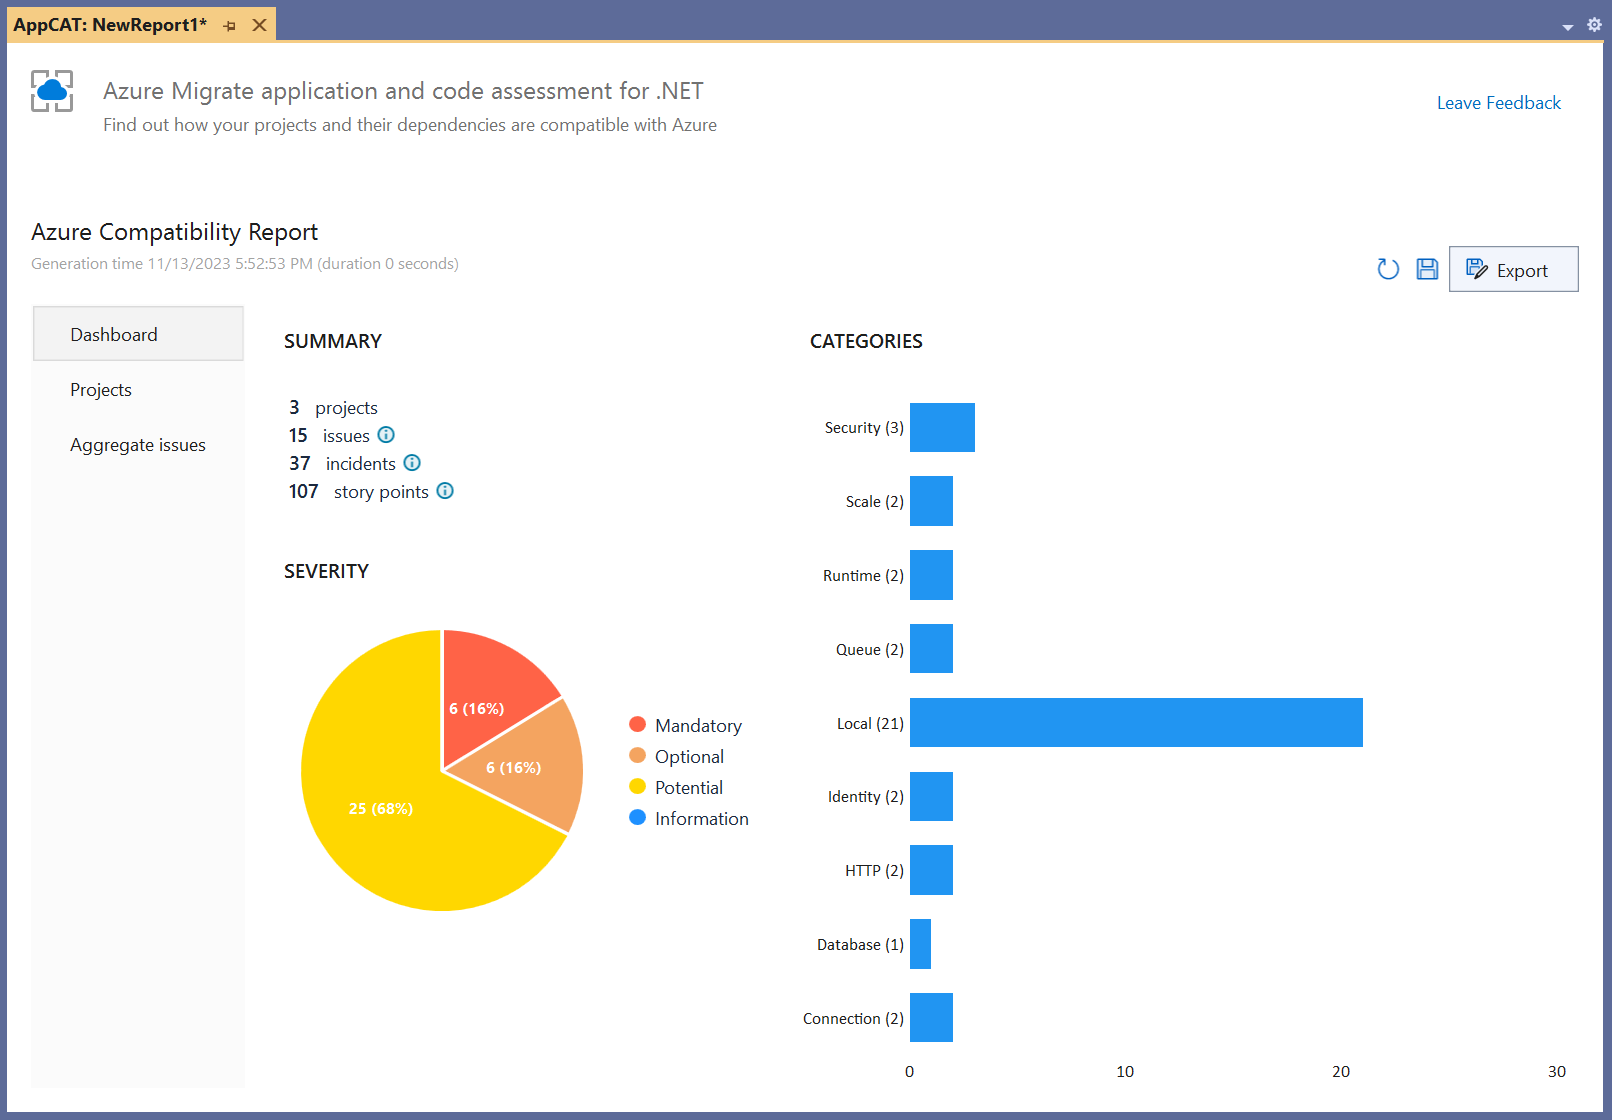 Figure 5: The Azure Migrate application and code assessment report dashboard